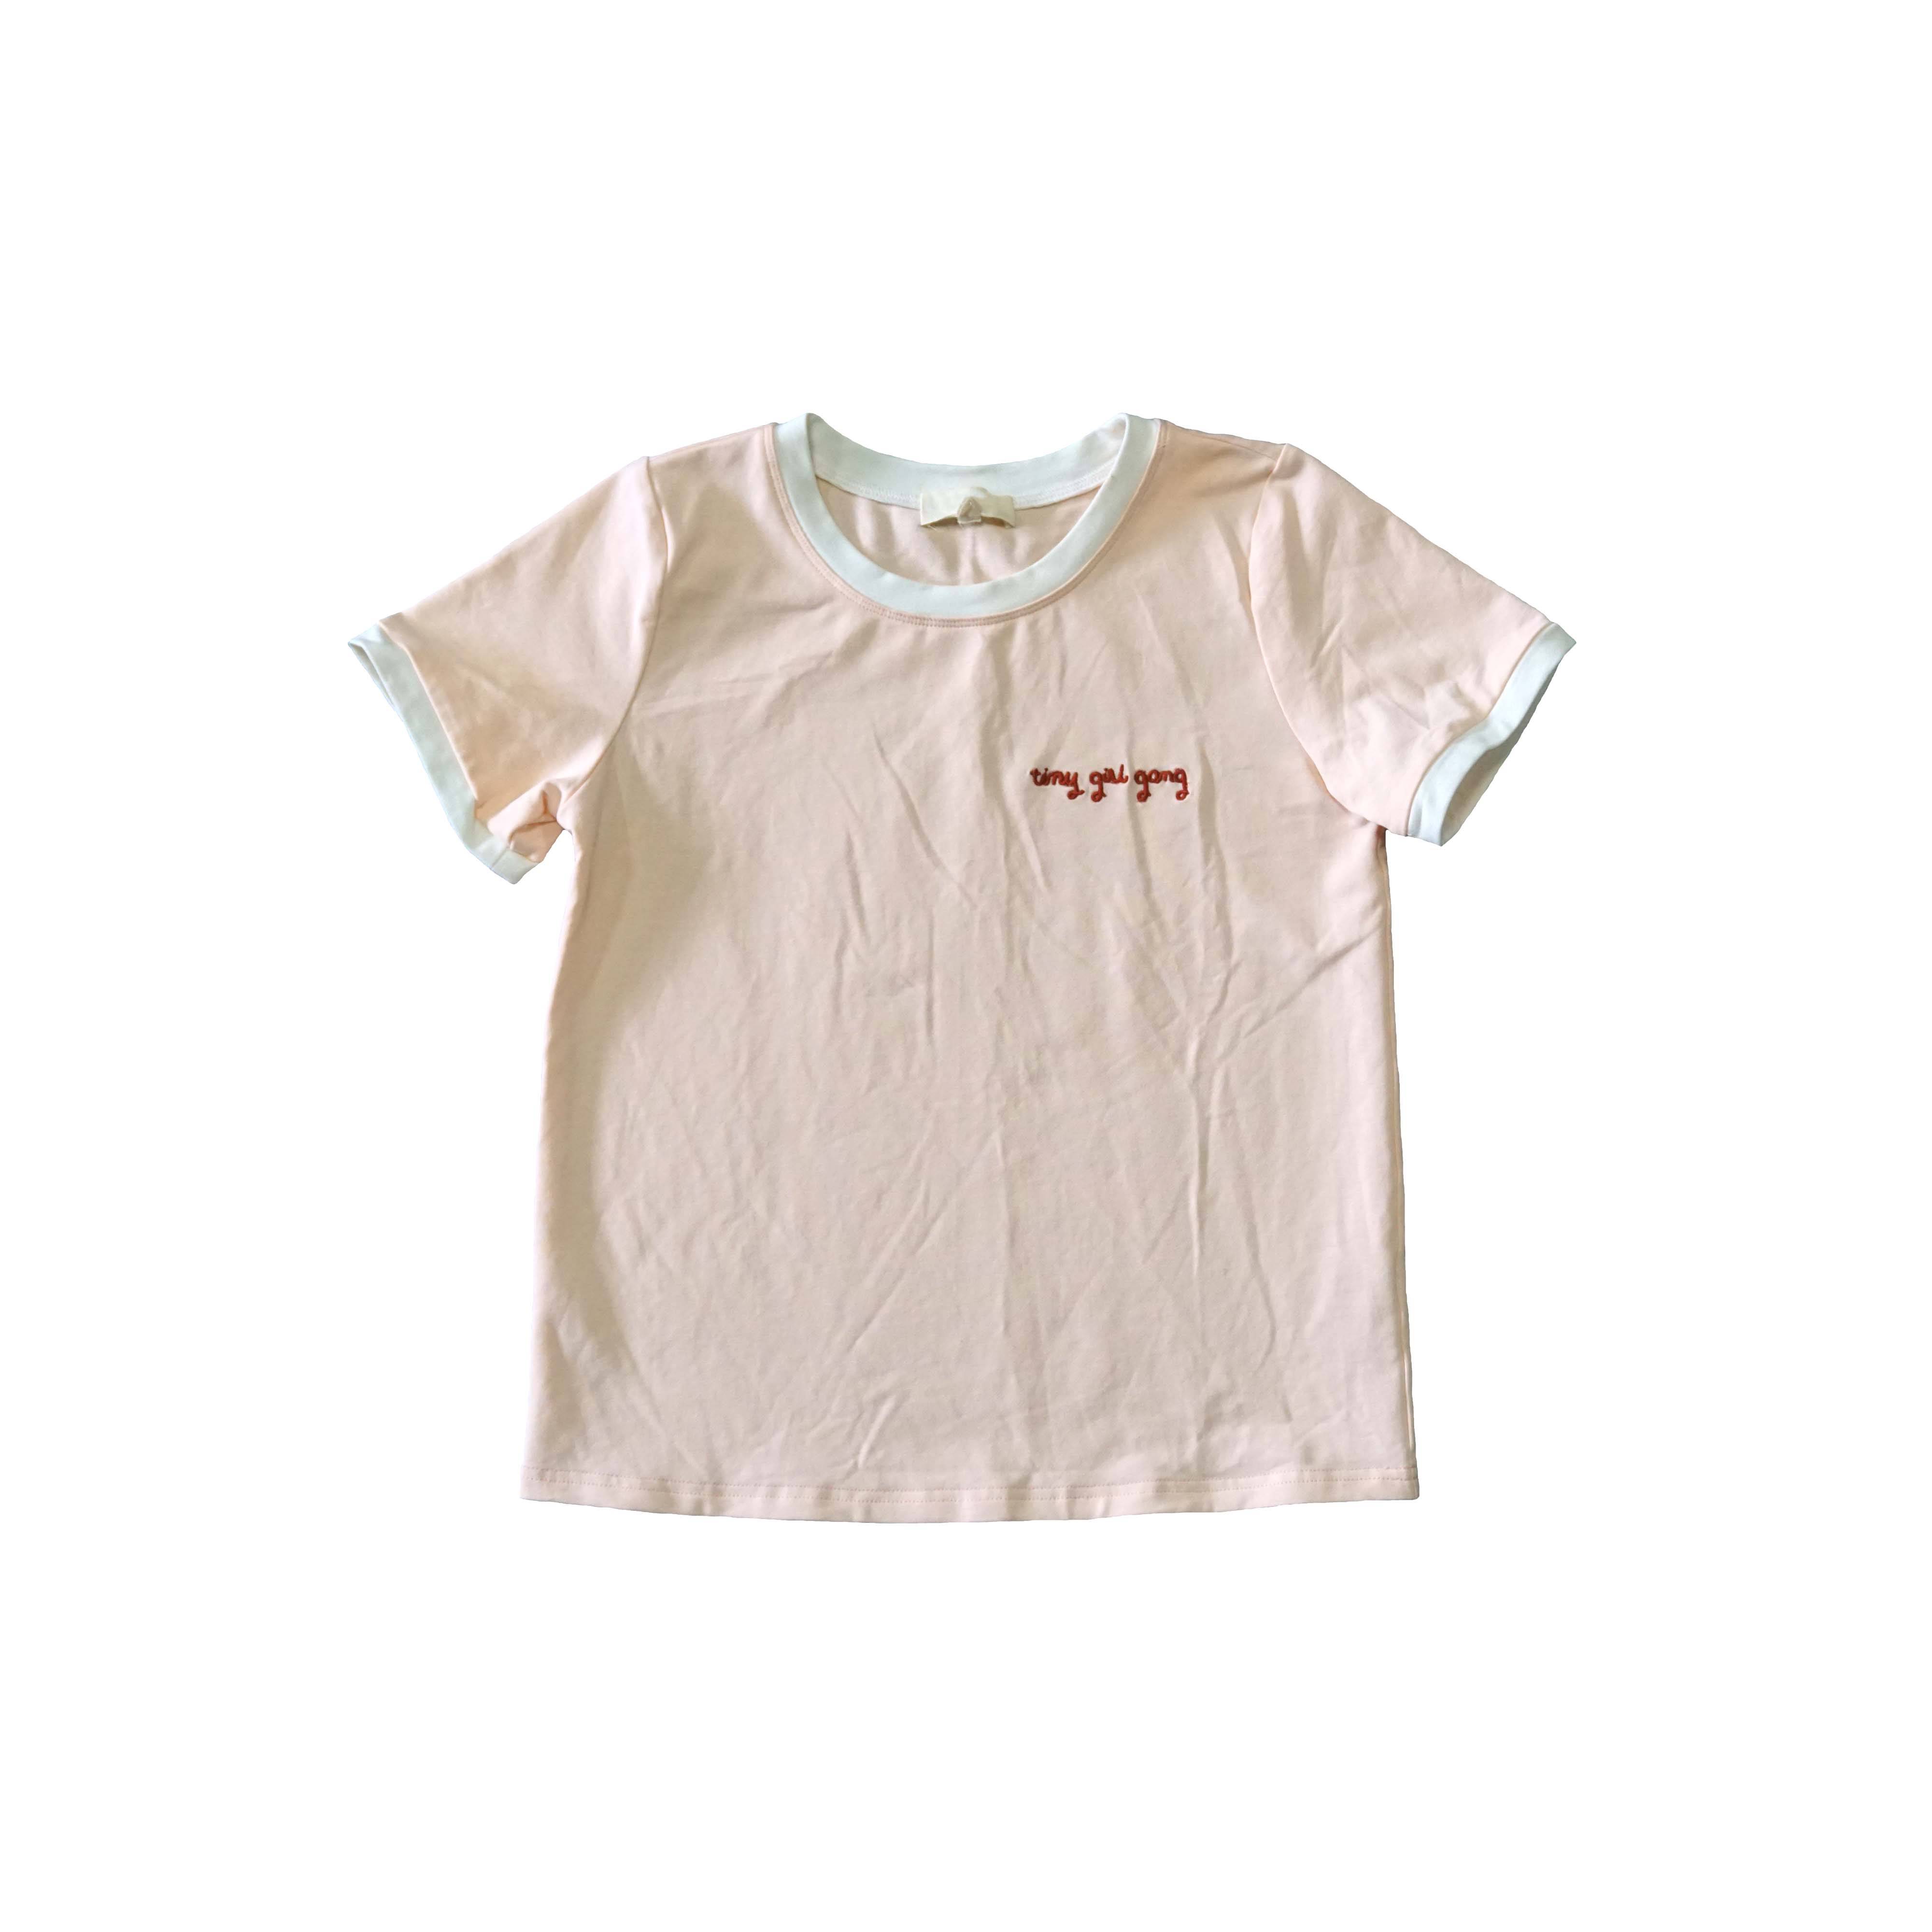 Adorable and innocent children's T-shirt